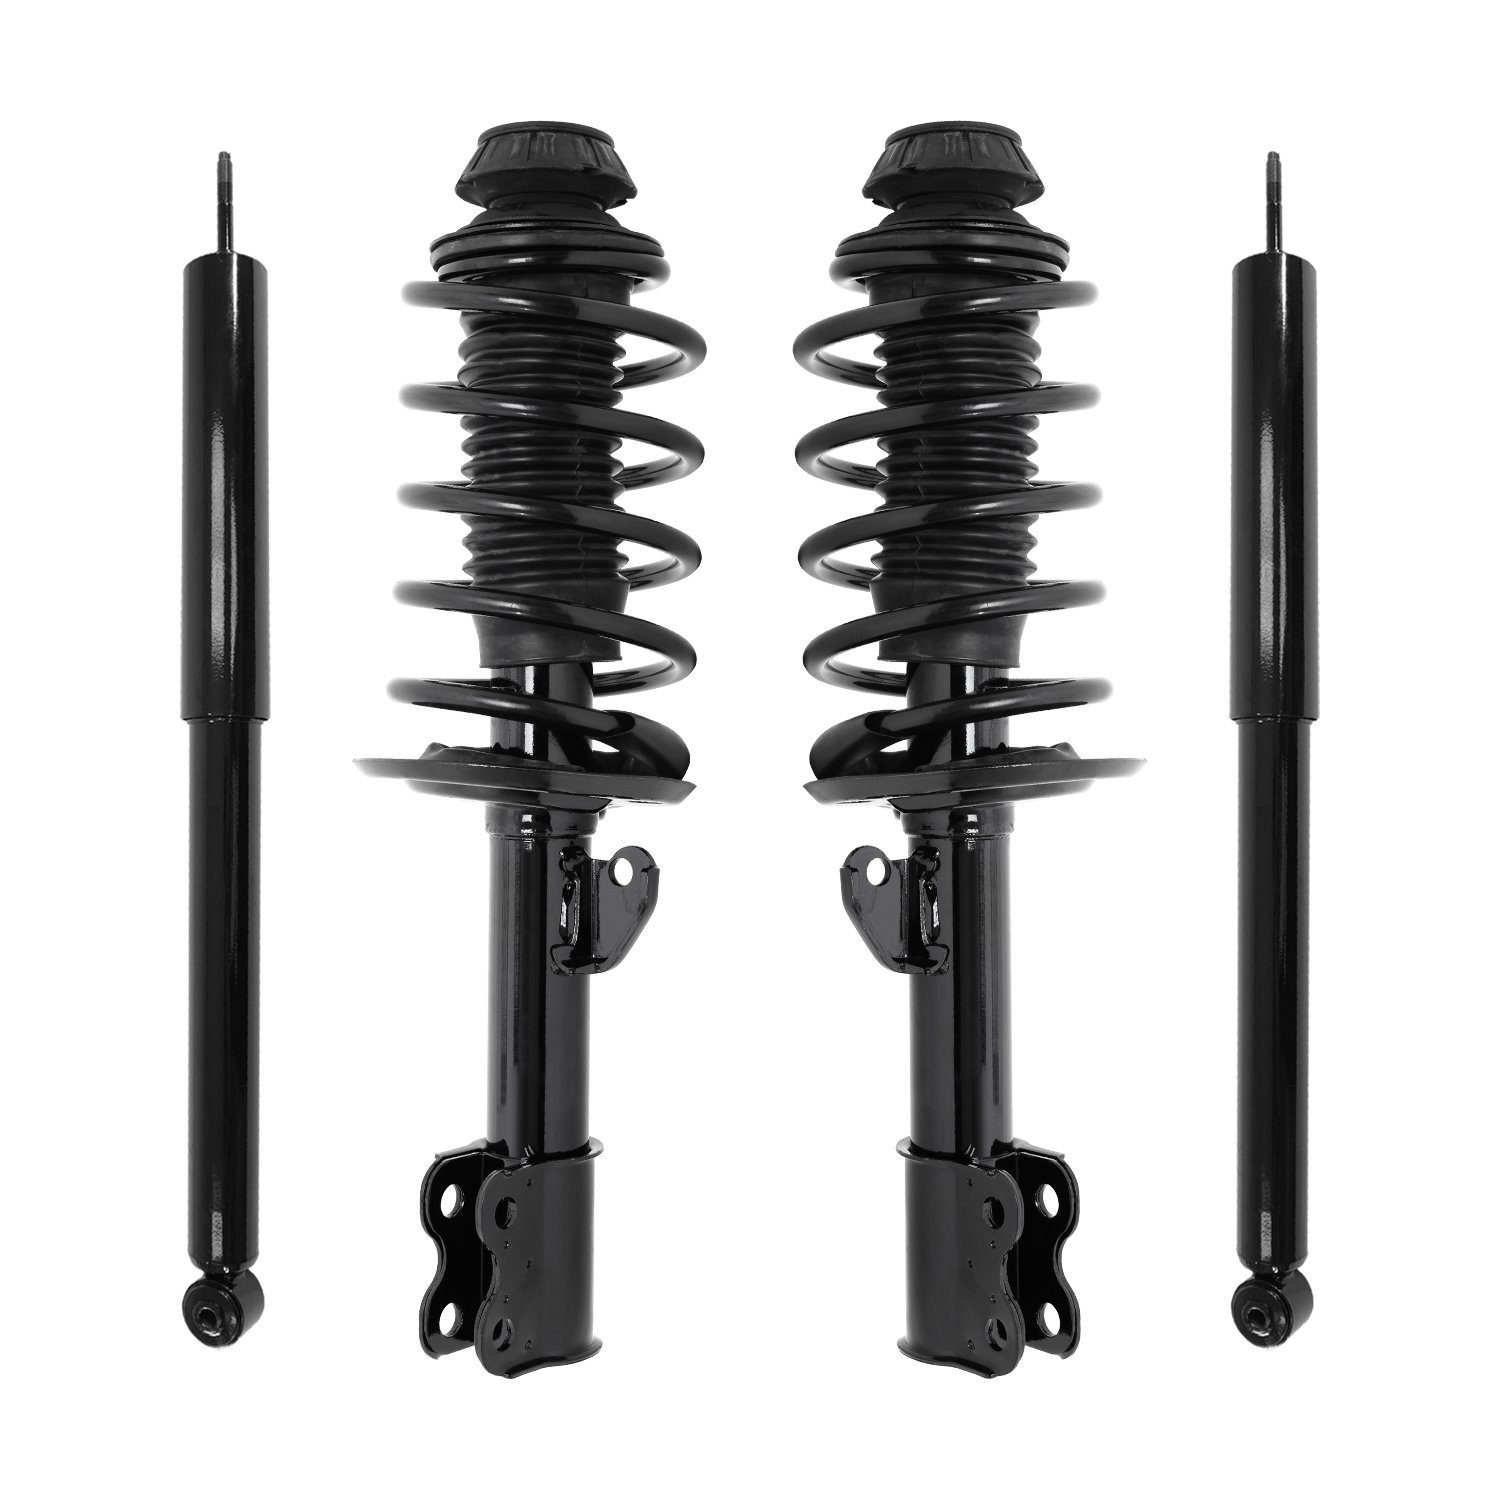 4-11109-254130-001 Front & Rear Suspension Strut & Coil Spring Assembly Fits Select Toyota Prius C